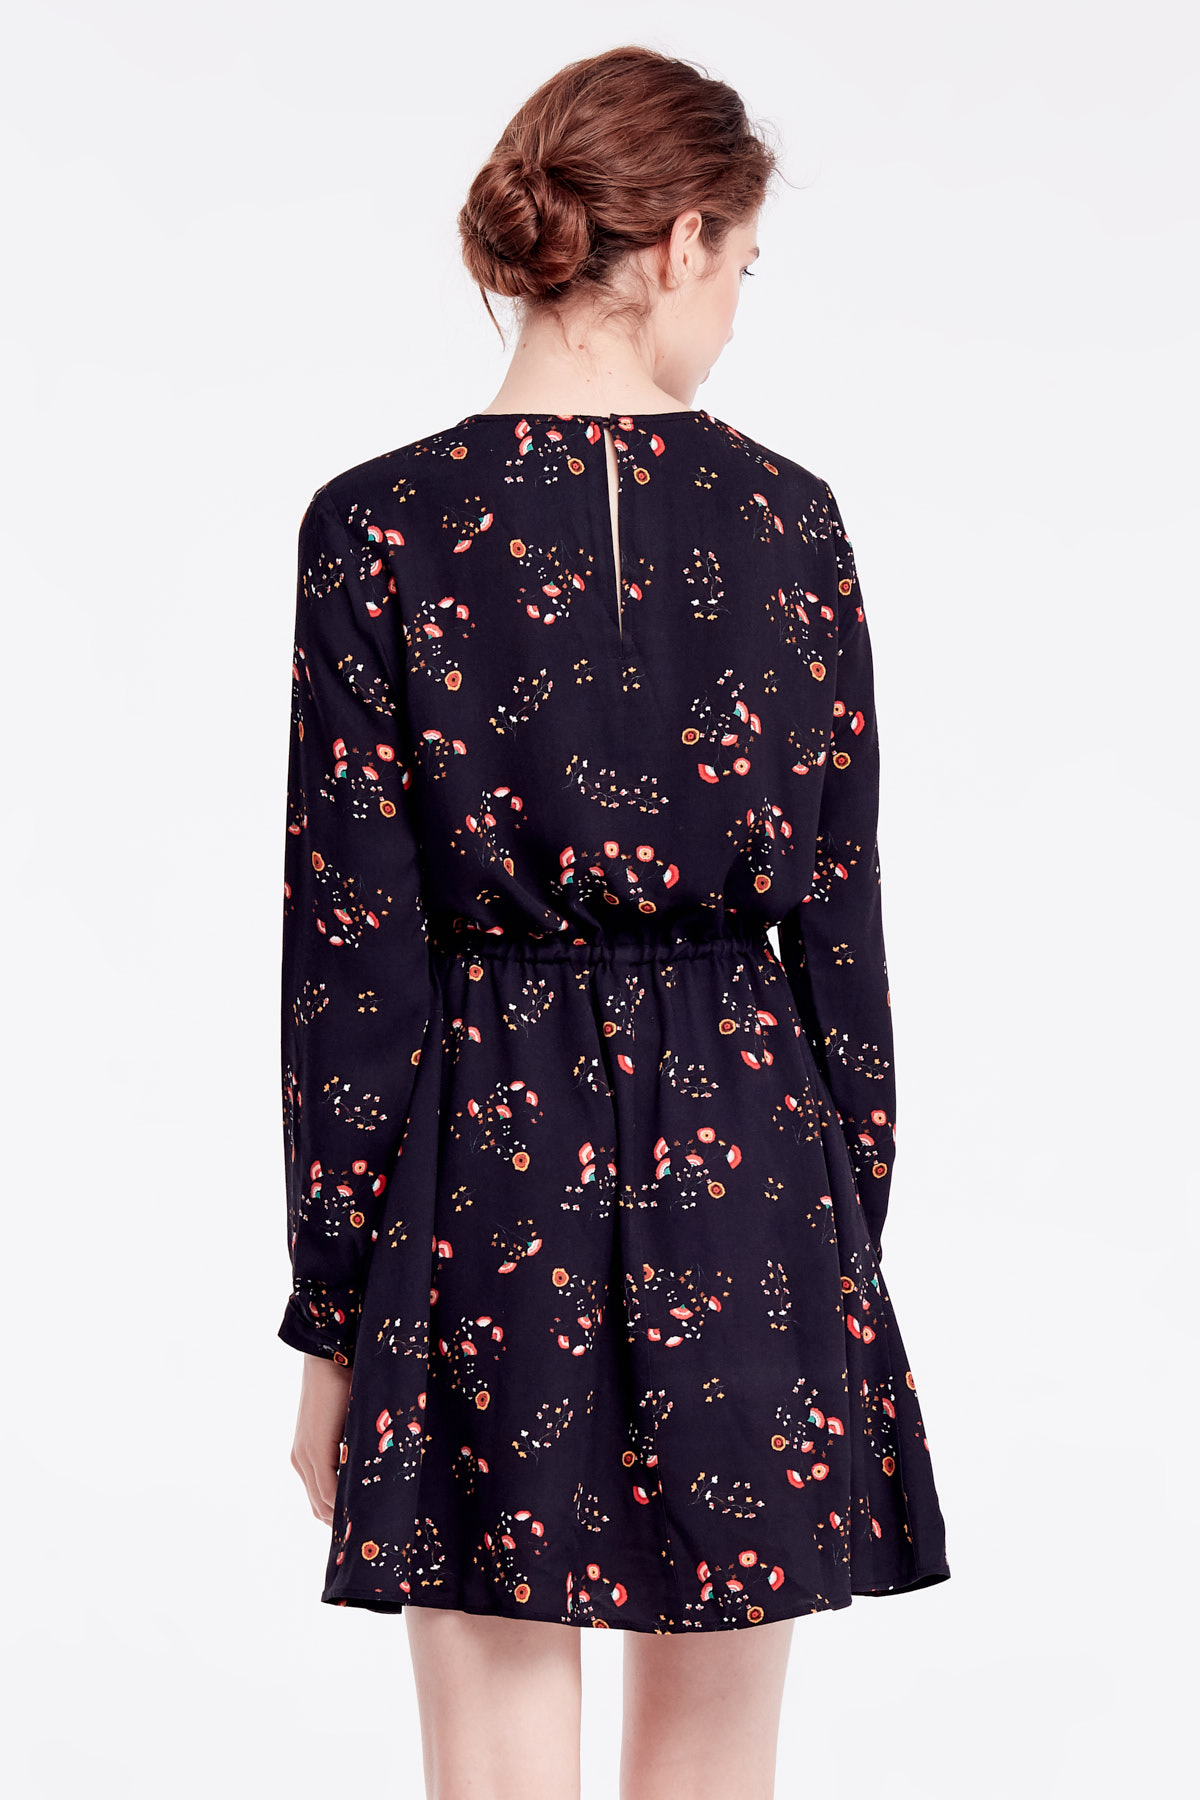 Black floral dress with straps on waist, photo 5